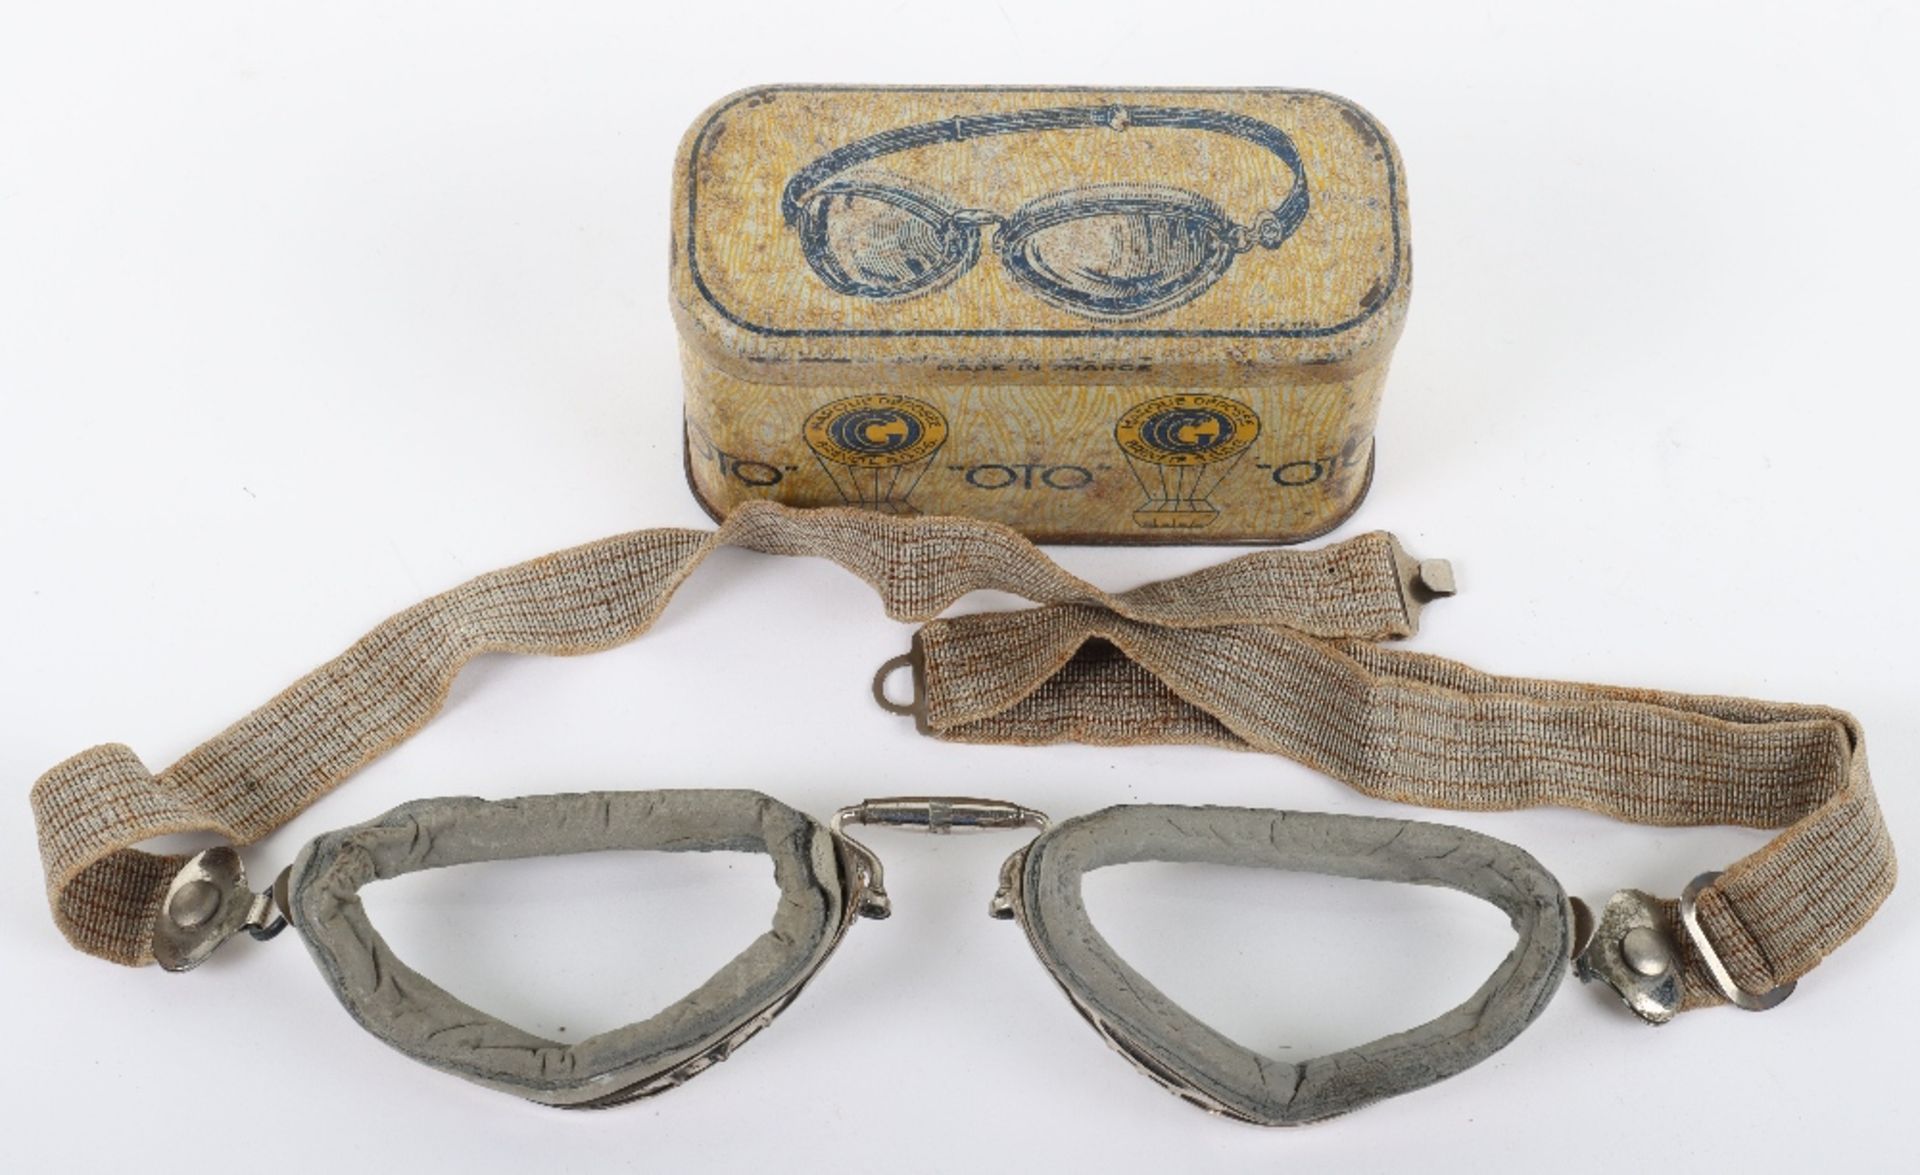 Pair of Vintage Aviators French Made Goggles “OTO MARQUE DEPOSEE BREVETE S G.D.G” - Image 2 of 8